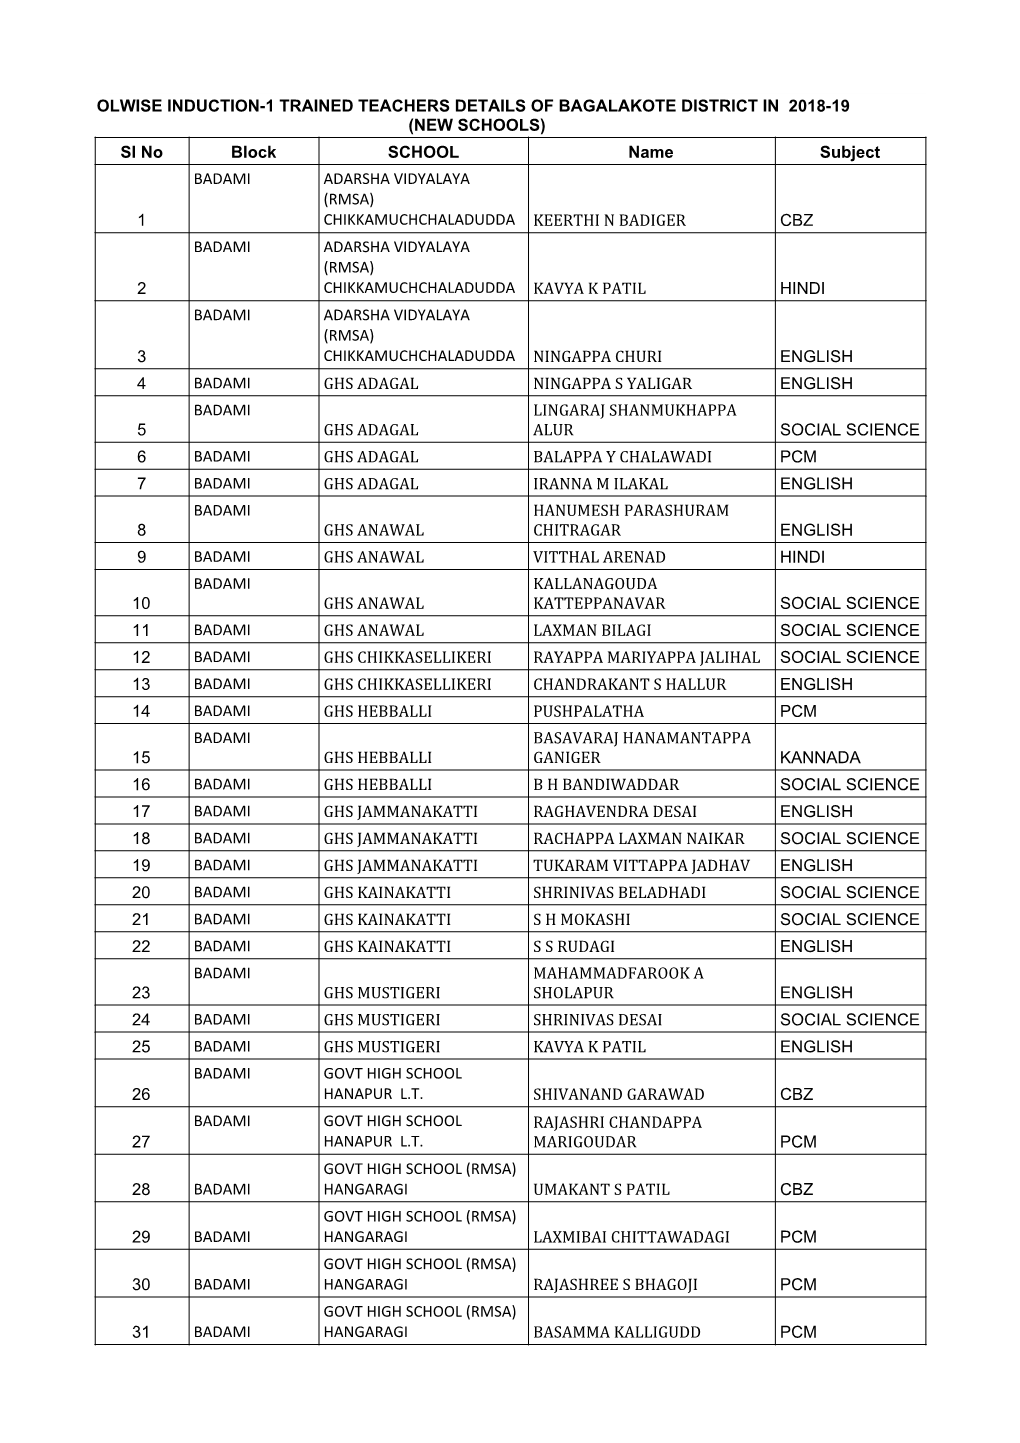 List of Trained Teachers Induction 1 Bagalakote